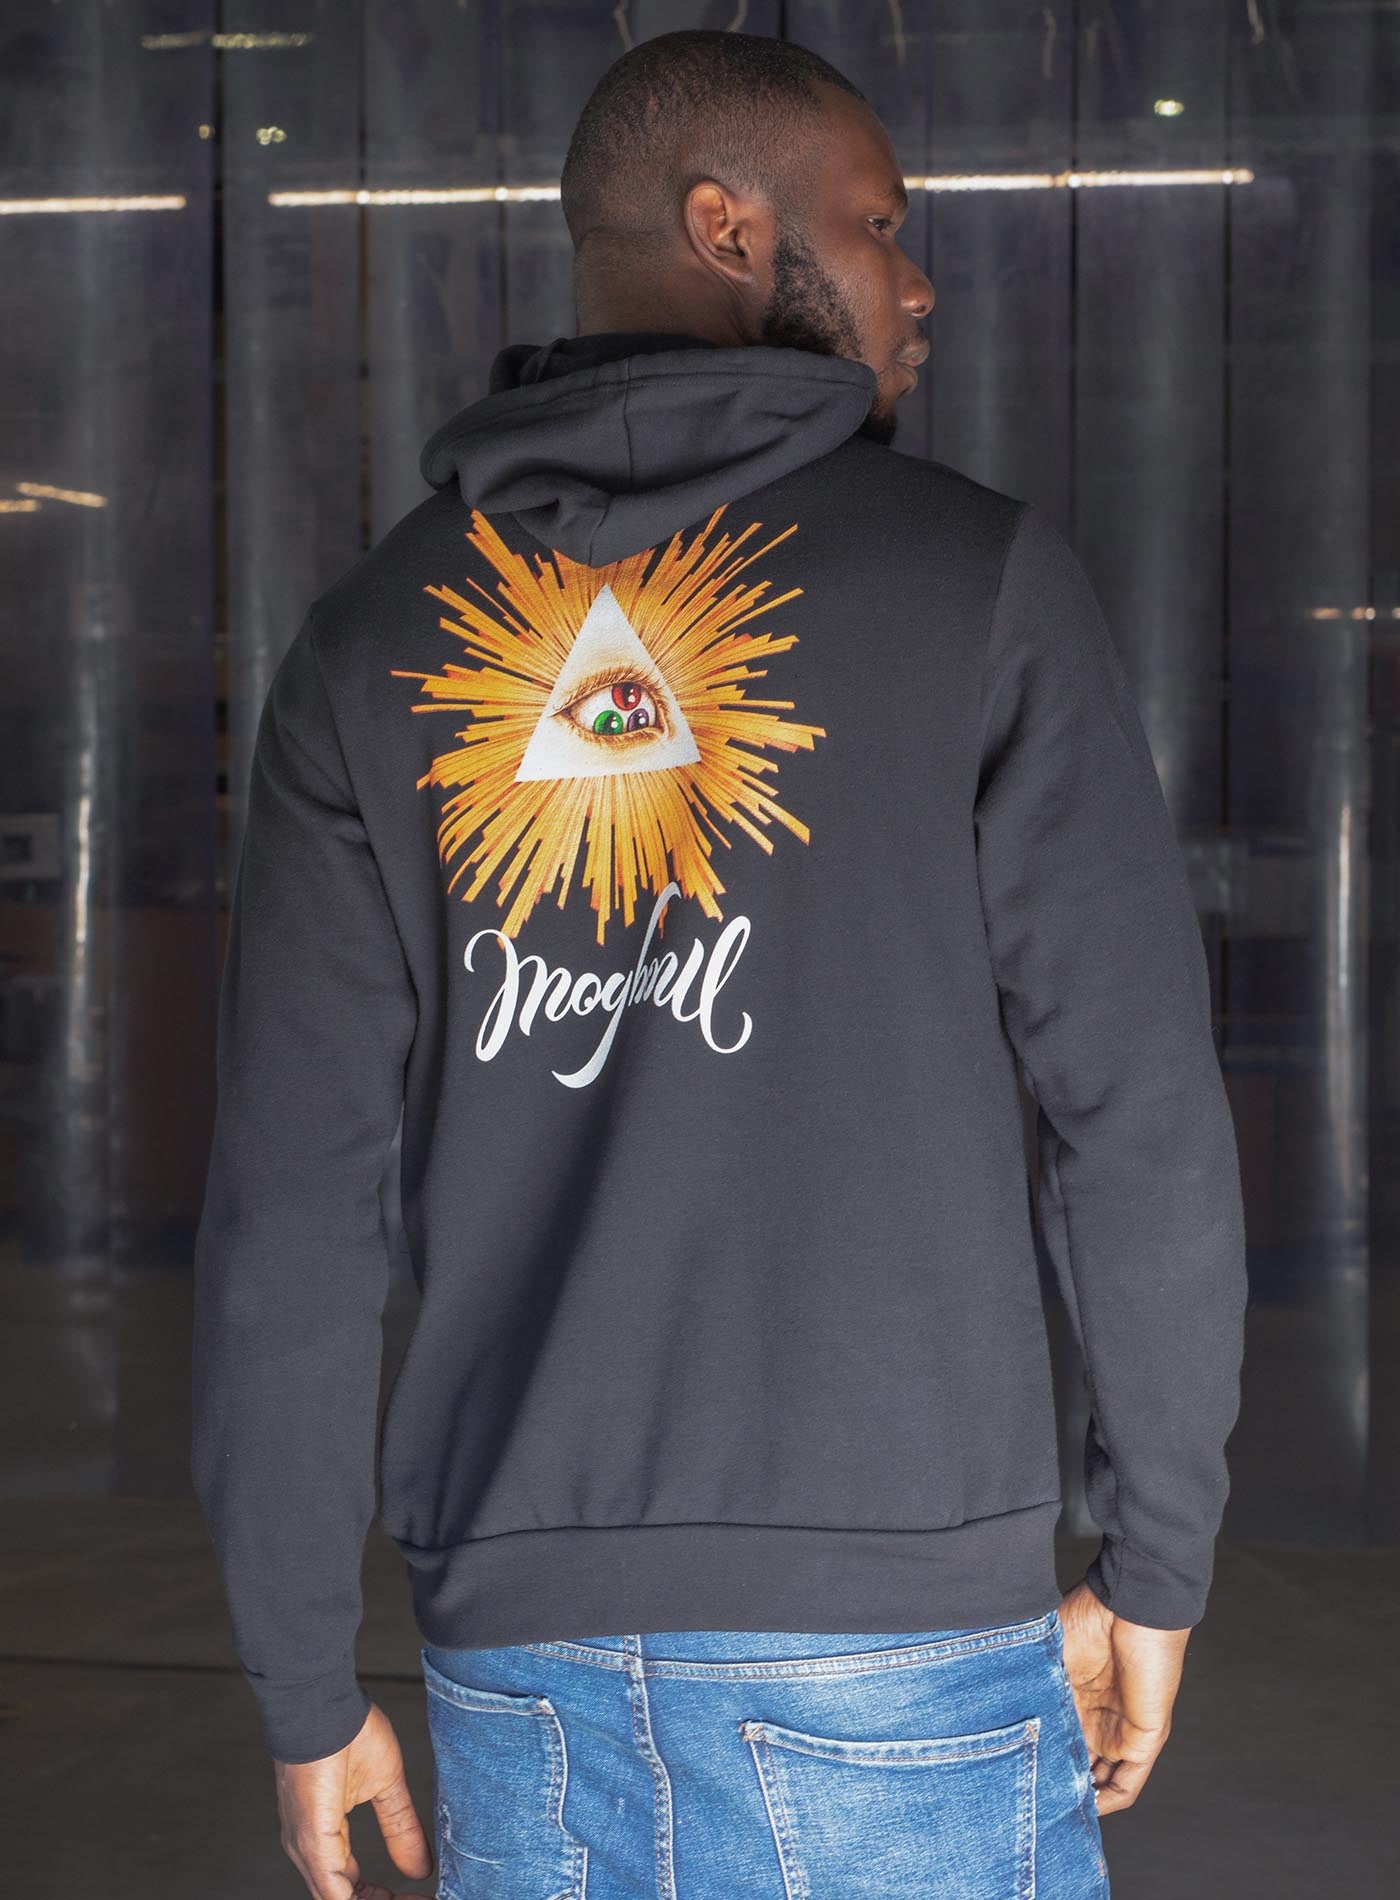 man modeling a black unisex hoodie featuring a back print of a reinterpretation of the Horus pyramid and Moghoul ambigram logo by G.M. Meave.